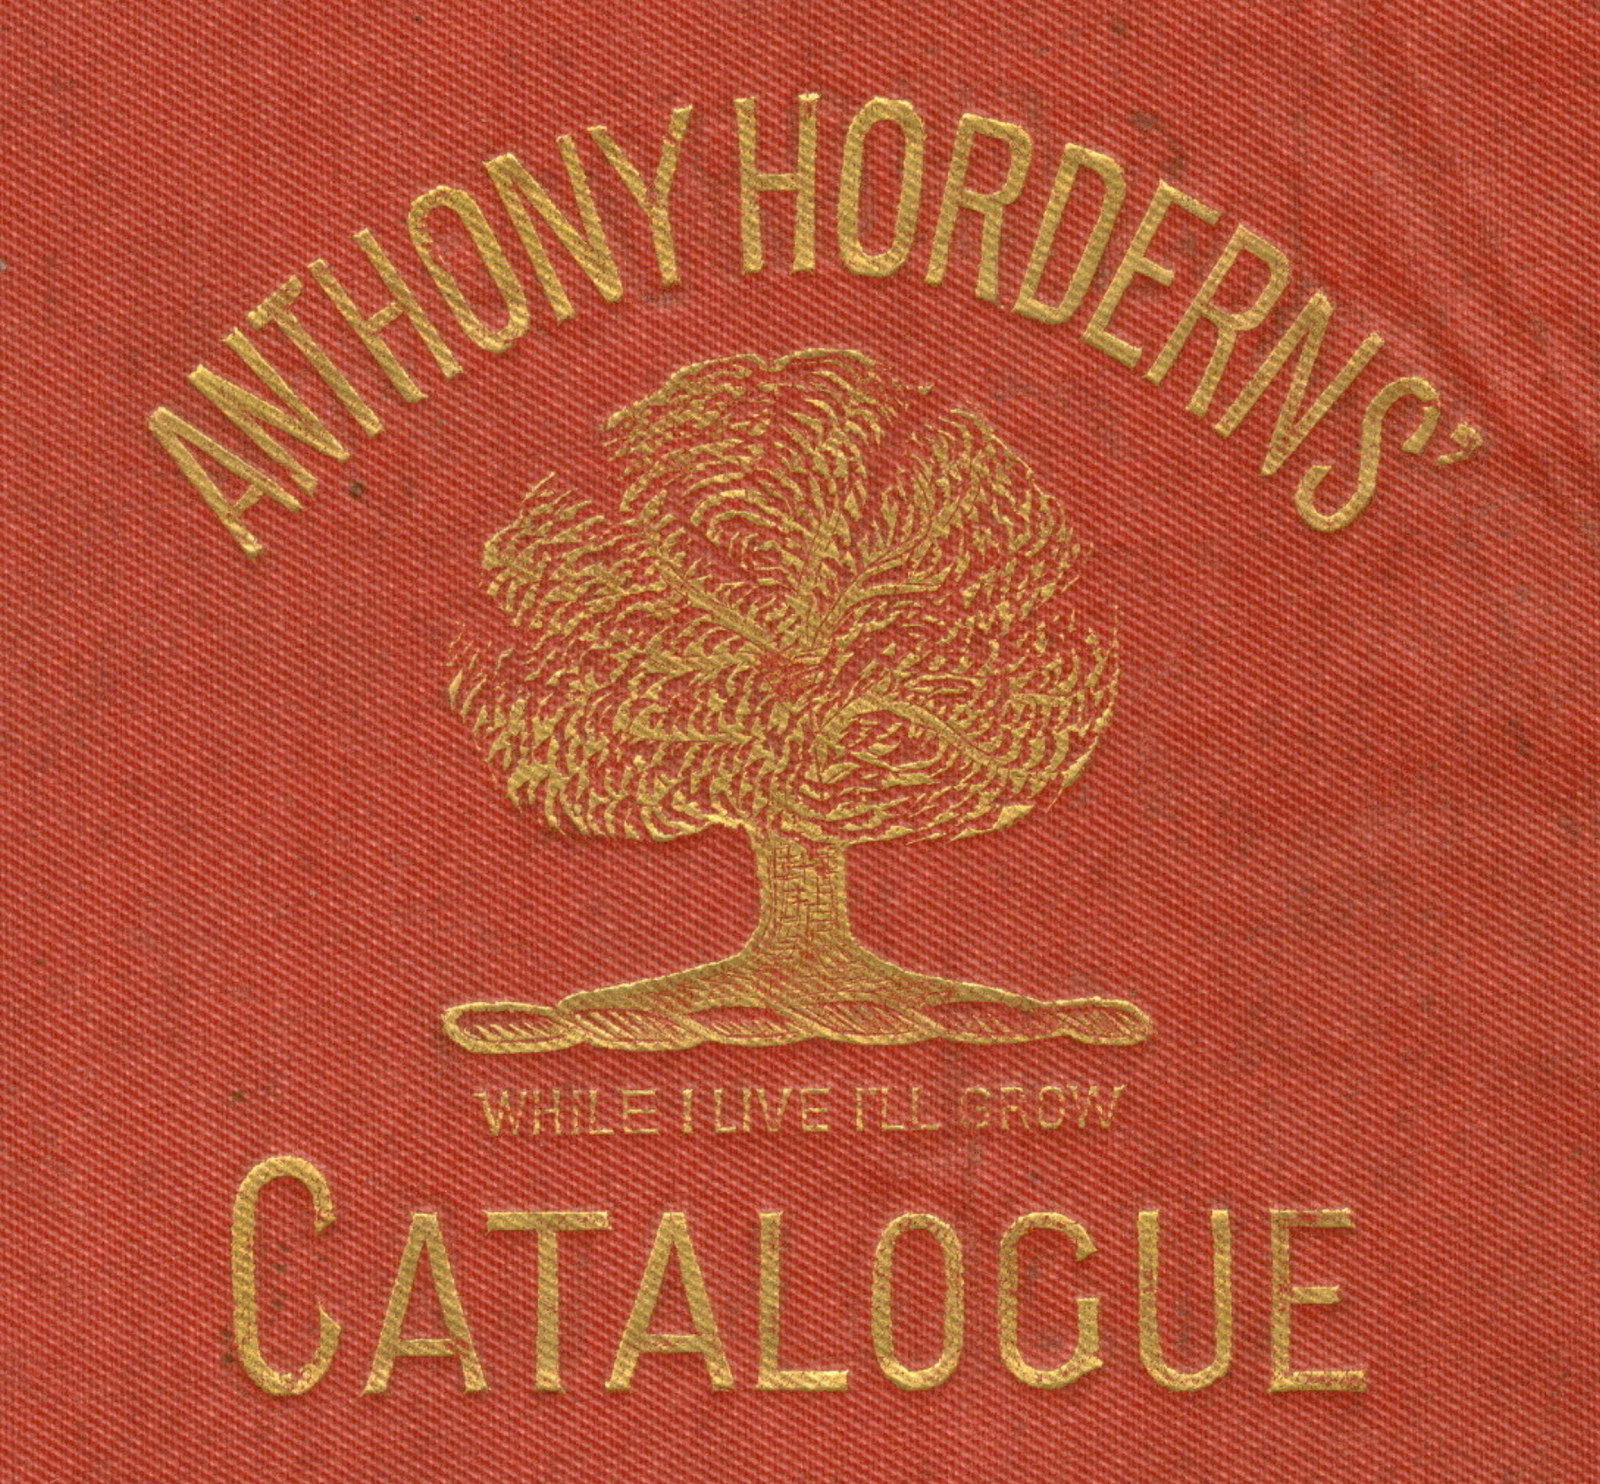 Catalogue cover of a Hordern and sons publication. there is an image of a tree and the words 'Anthony Hordern & Sons catalogue - While I live I'll grow' wrapped around an image of a tree. Text and image are gold on an orange background.